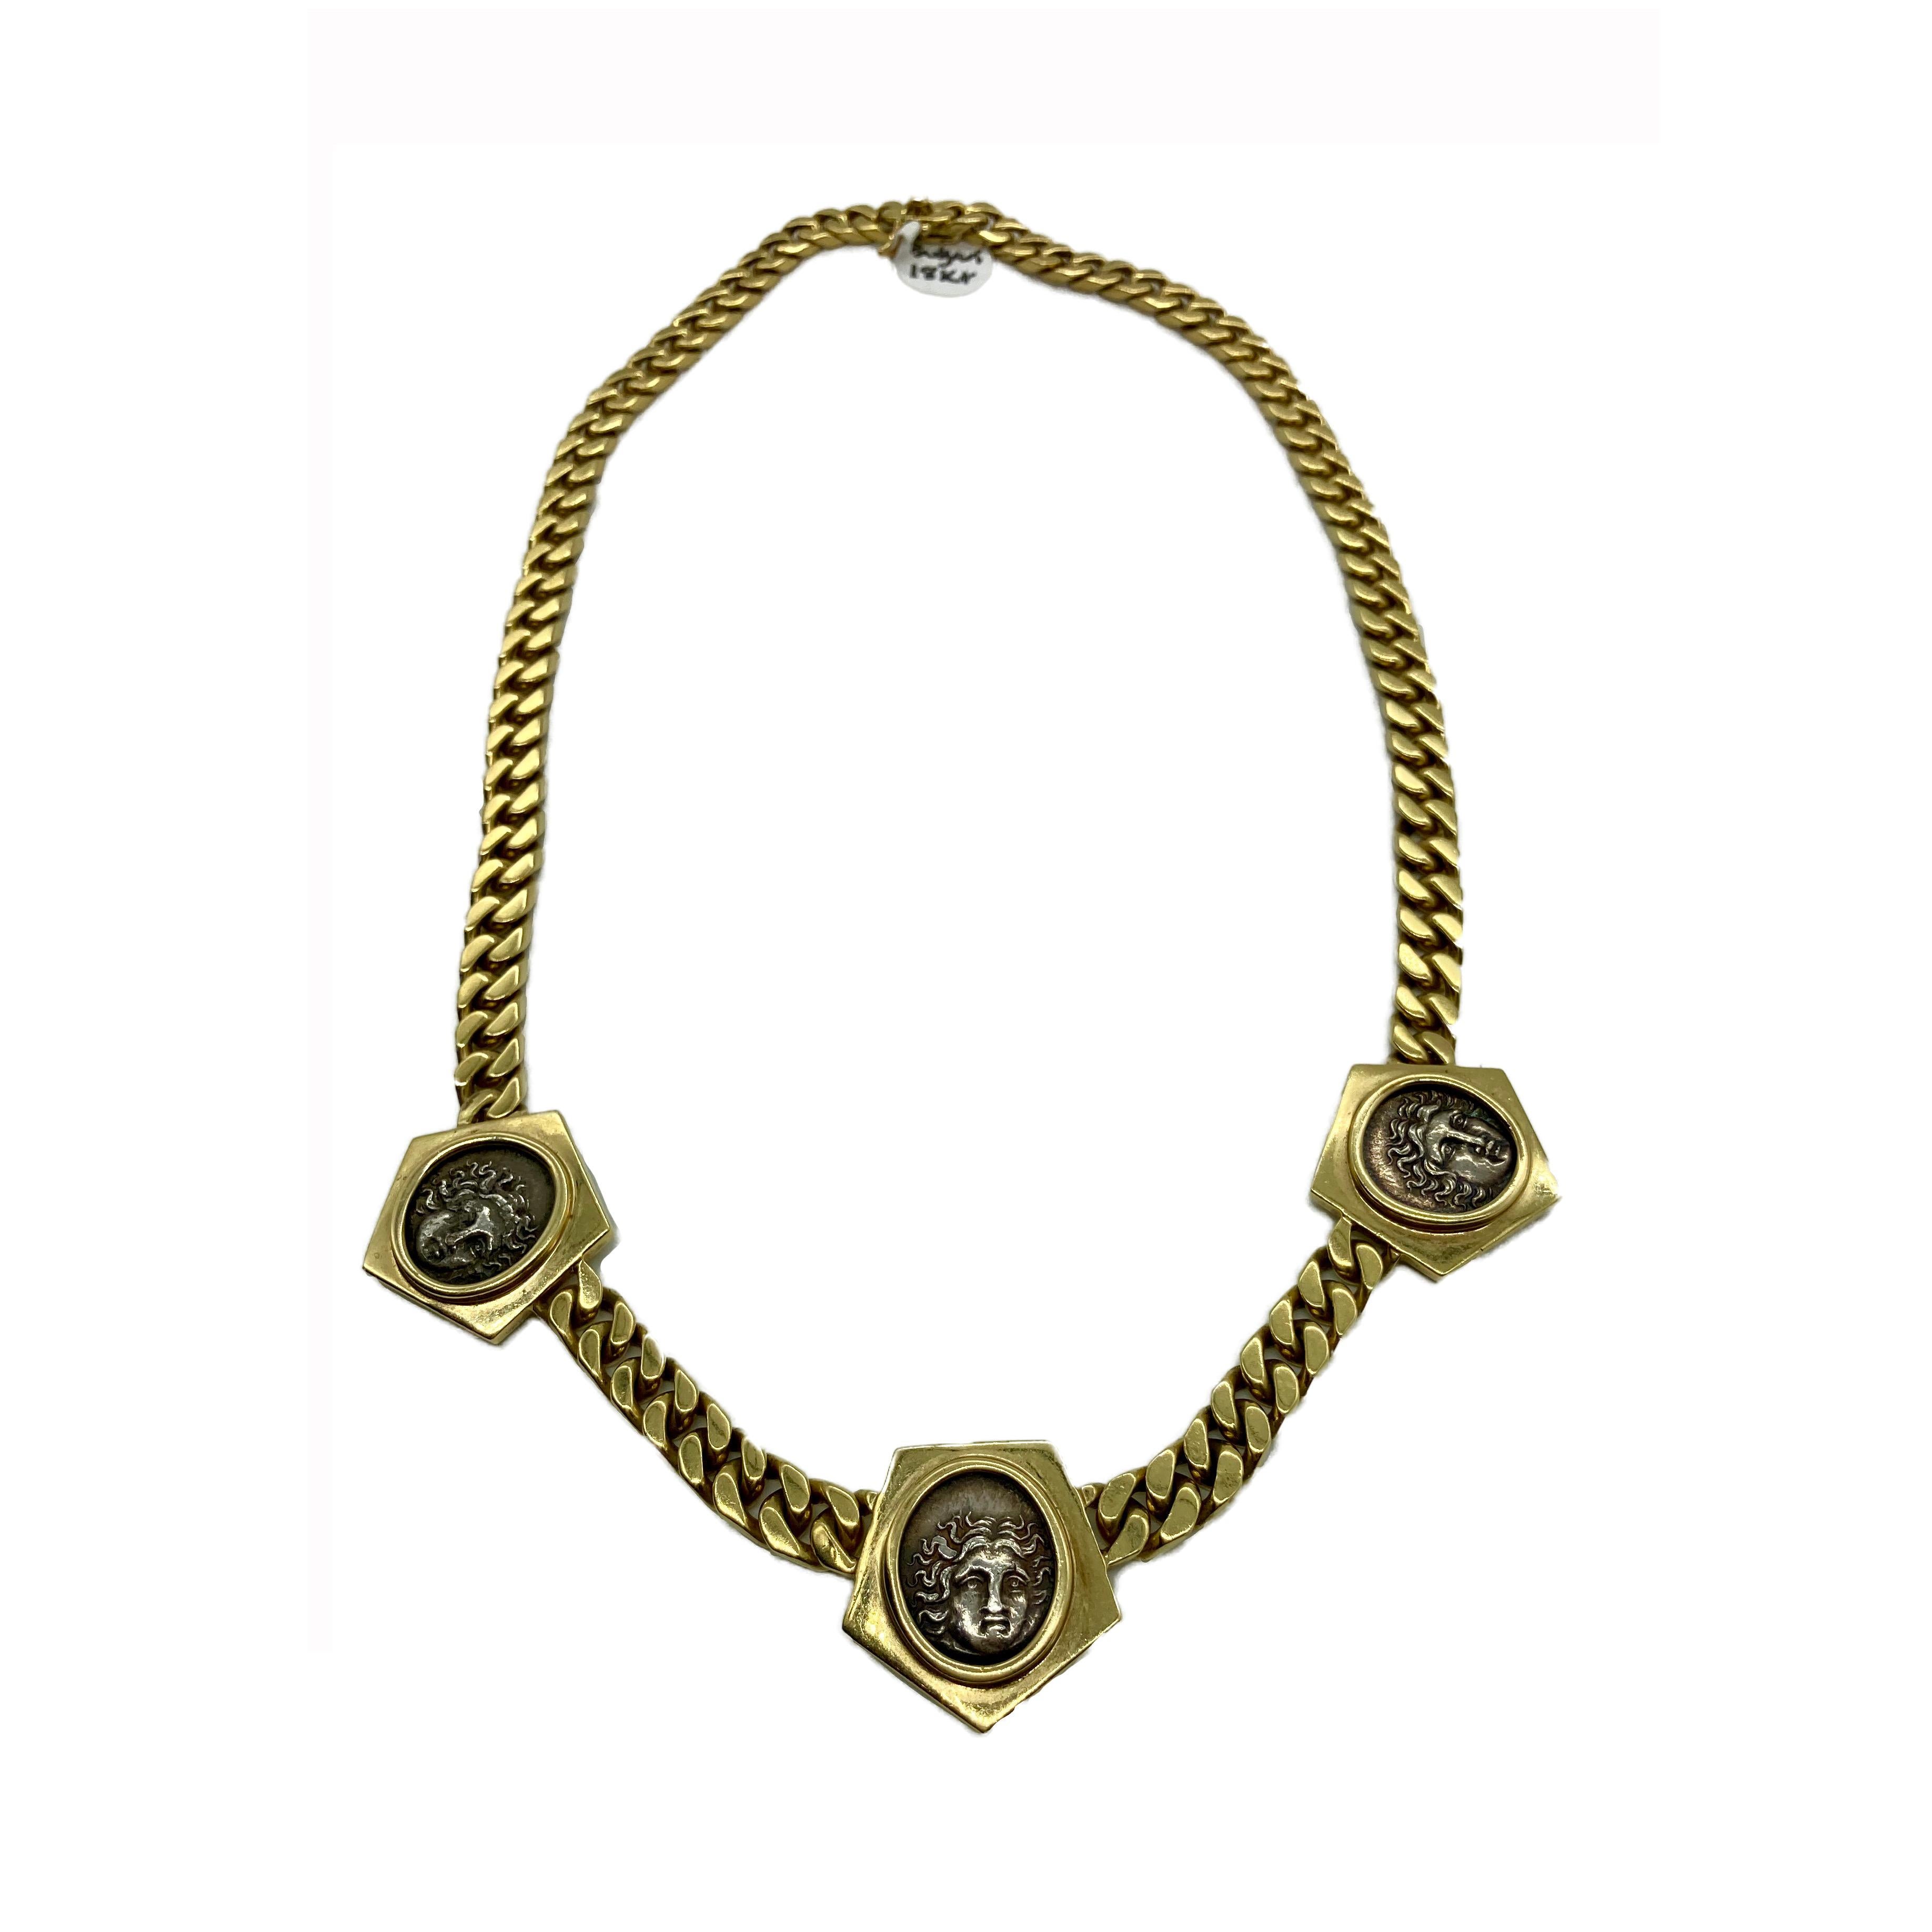 A chic vintage Bulgari Monete 18 karat yellow gold curb link chain necklace suspending 3 Ancient Greek coins. Made in Italy, circa 1970s. 